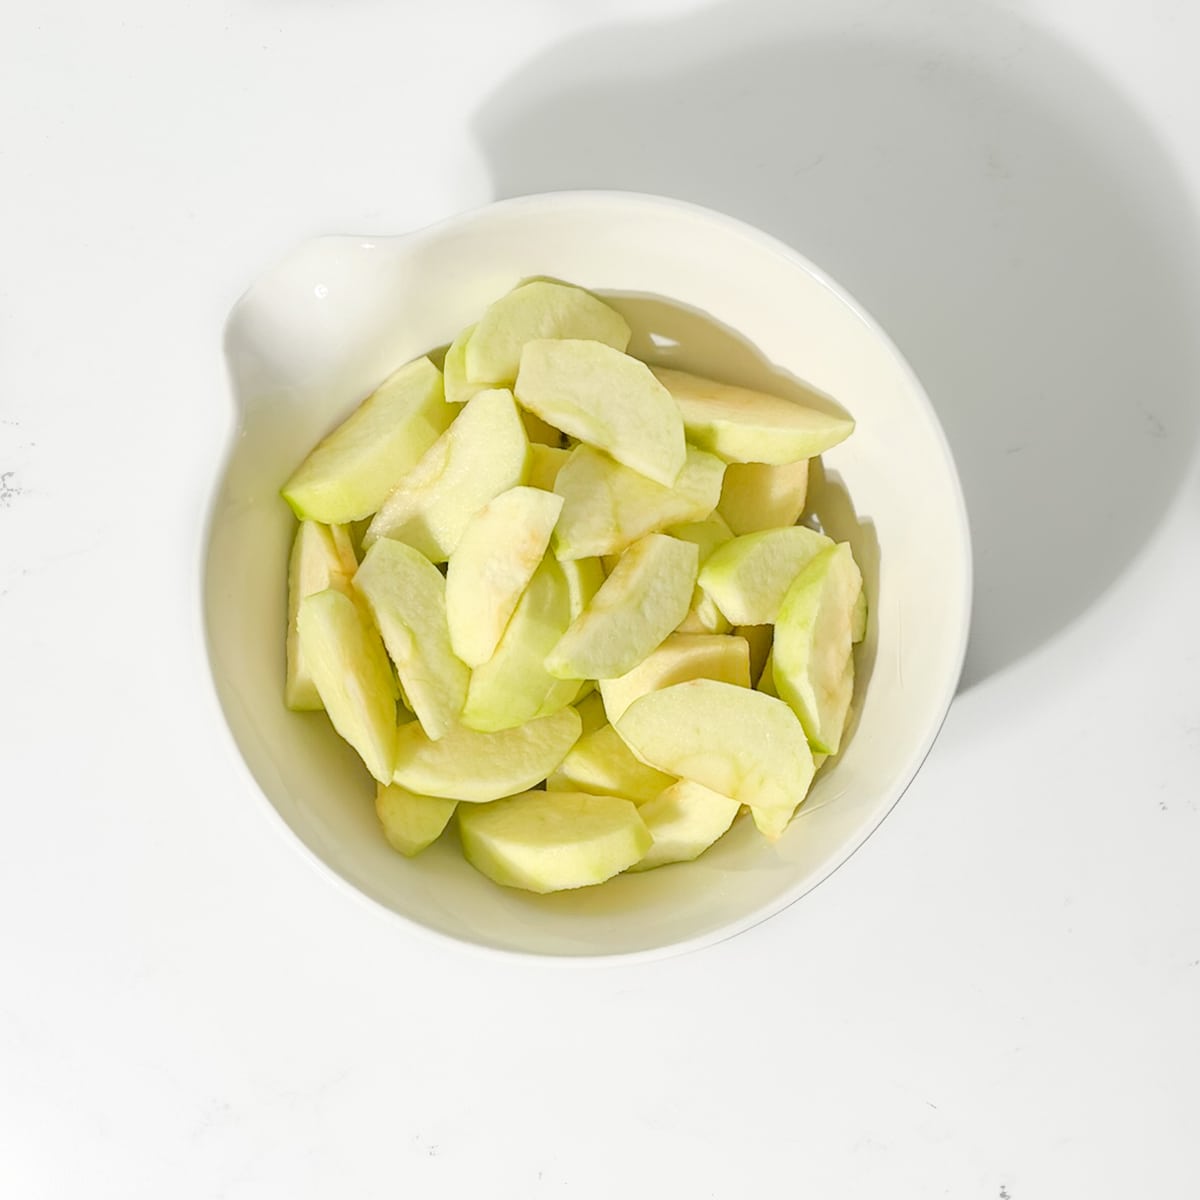 Sliced apples in a white bowl.